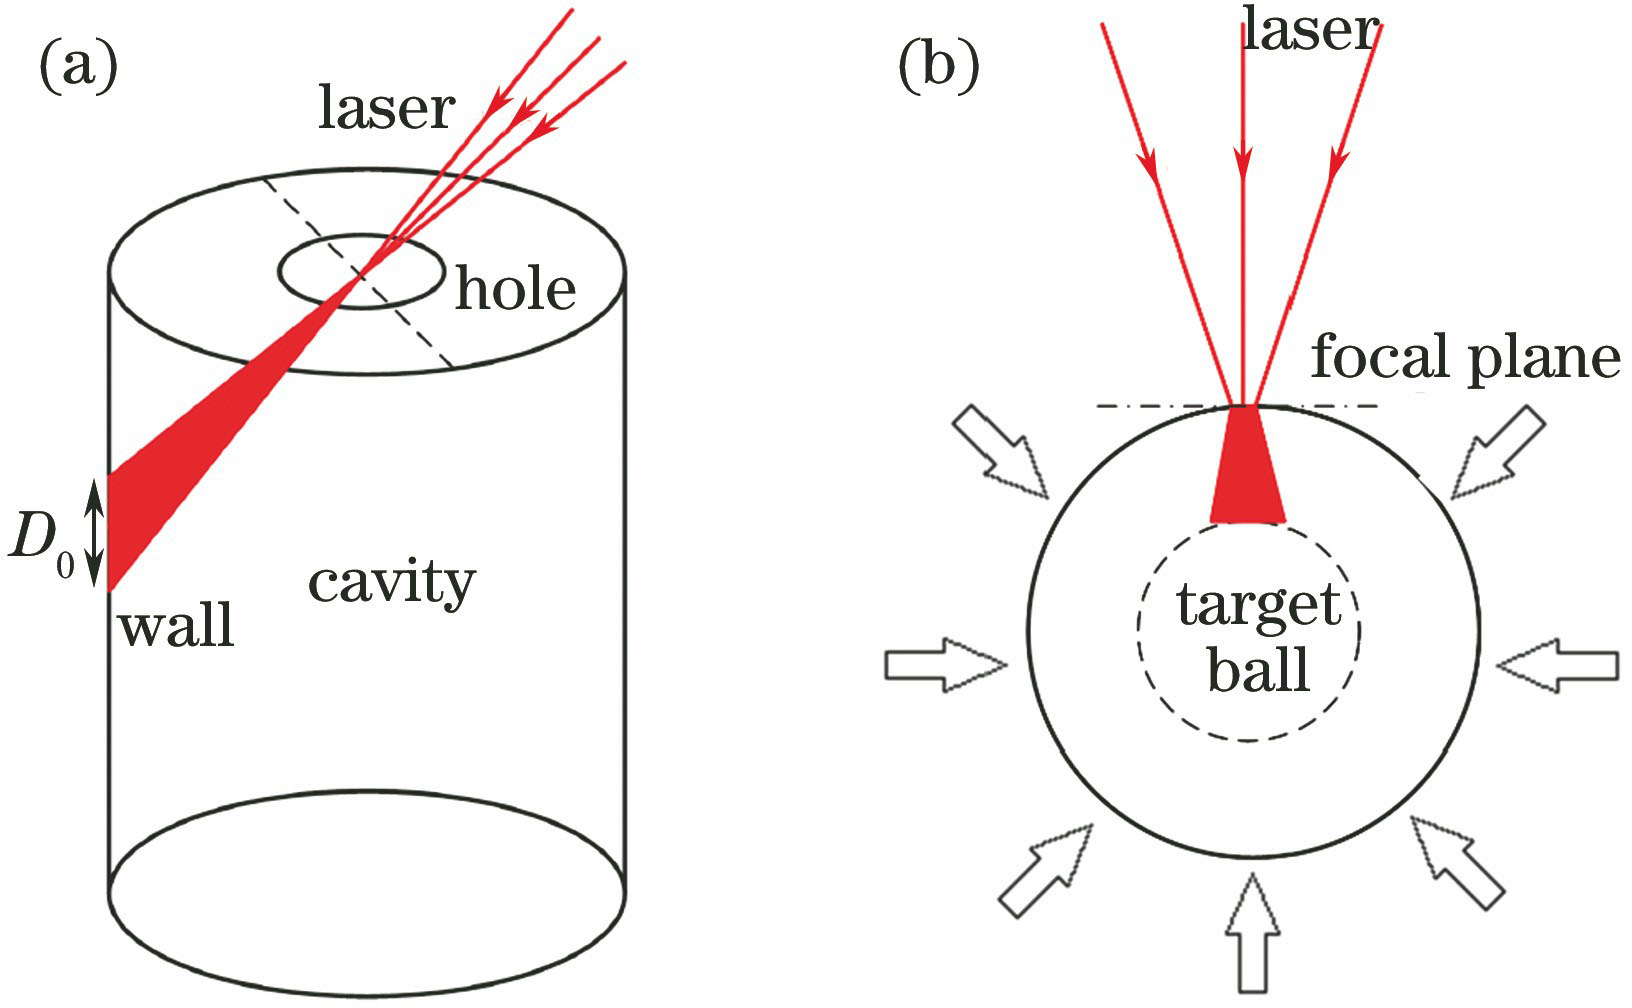 Quantification of 3D light field. (a) Indirectly driven black cavity injection model; (b) directly driven spherical target compression model